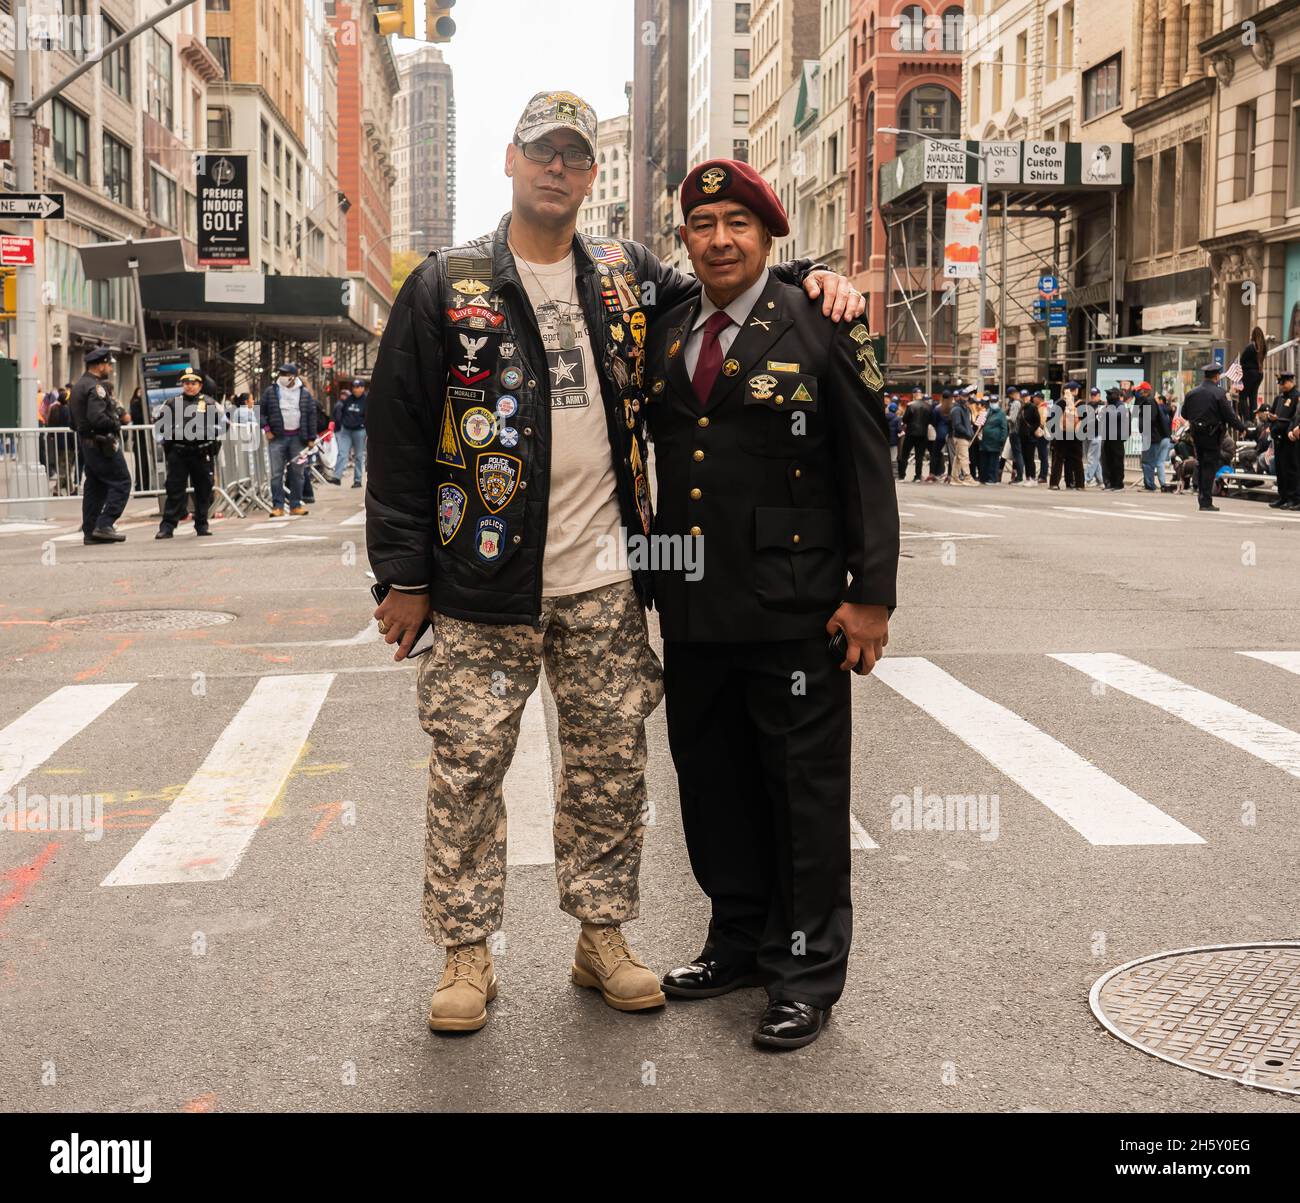 Manhattan, 5th Avenue, New York City  USA: November 11, 2021: Annual Veteran's Day Parade ; American veterans of foreign wars; American heroes Stock Photo